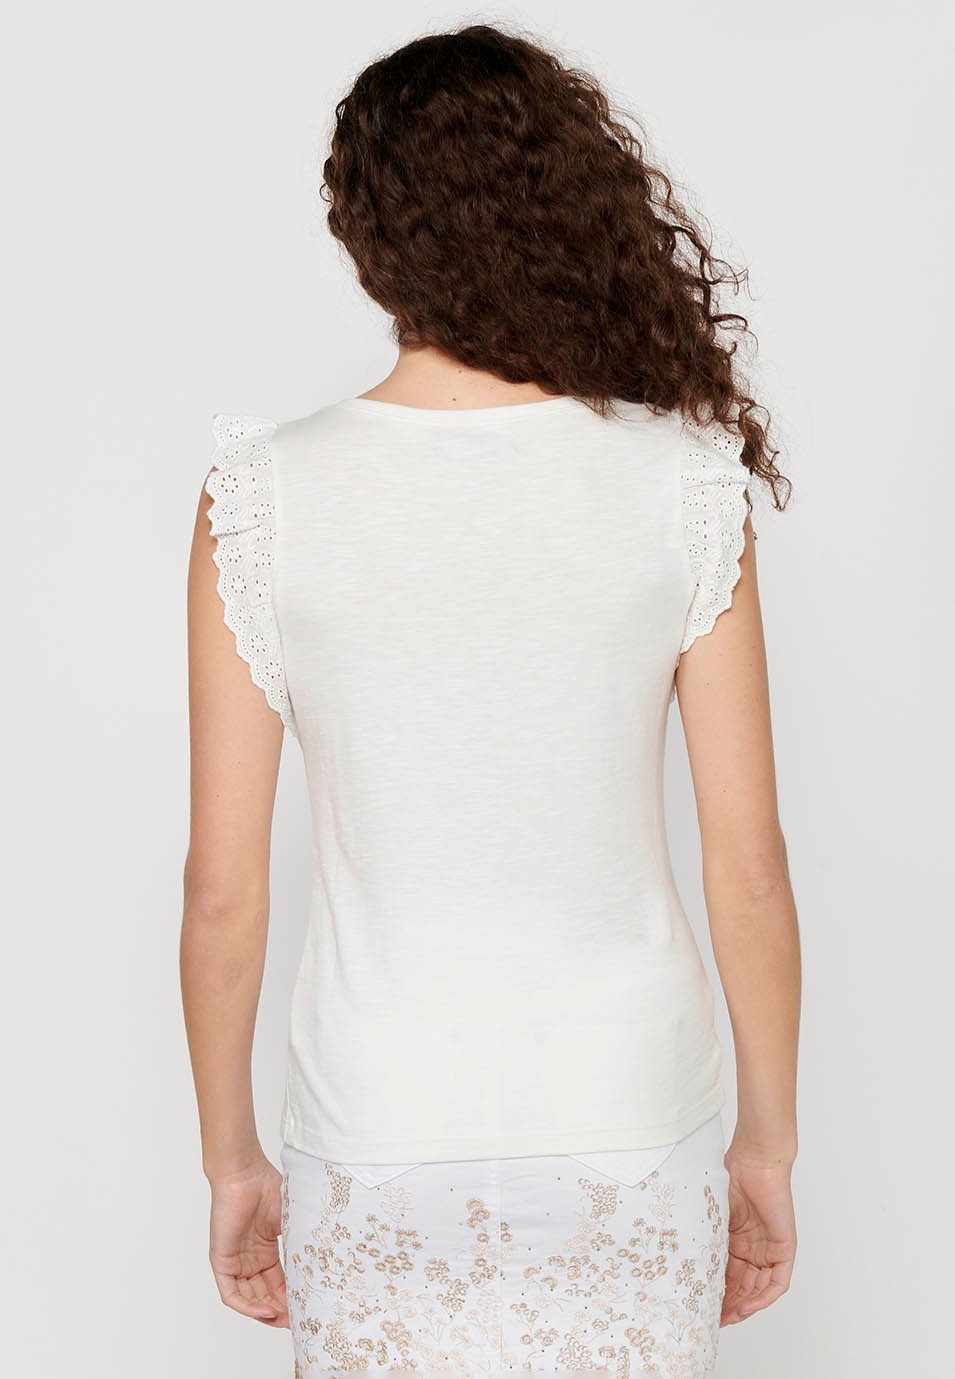 Sleeveless T-shirt Cotton Top with Ruffles on the shoulders and White Front Detail for Women 1